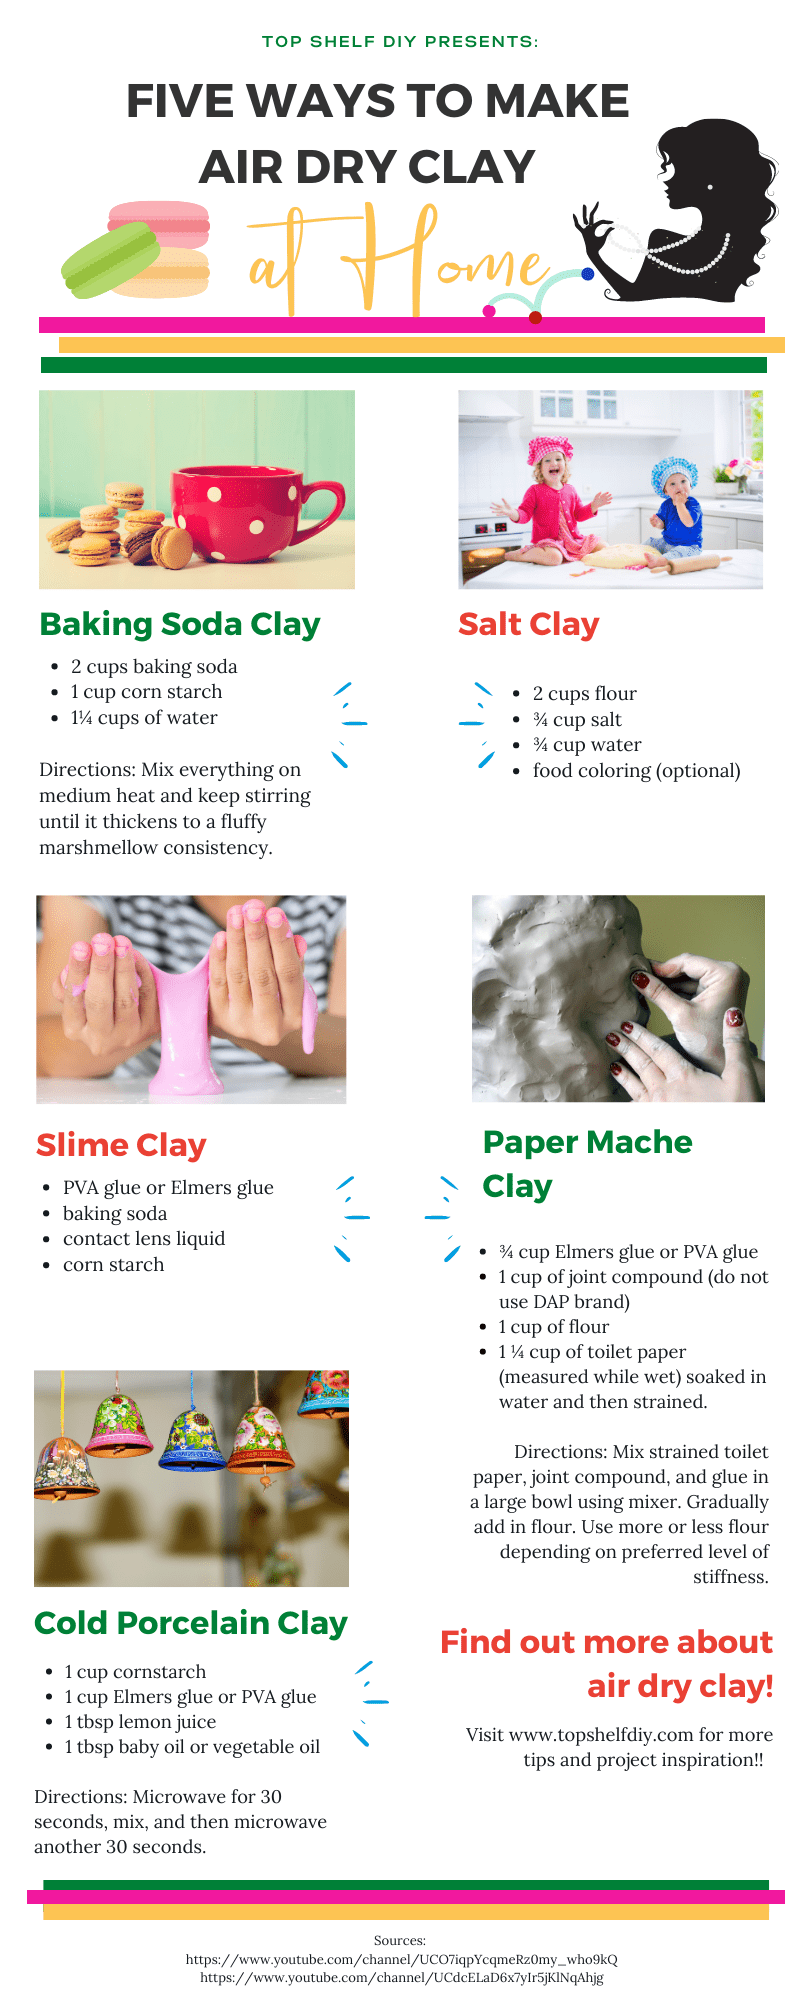 Air dry clay is super easy to make during a quarantine. Here are five ways to pull it together using ingredients in your pantry, PLUS three simple Christmas decor projects using clay. 